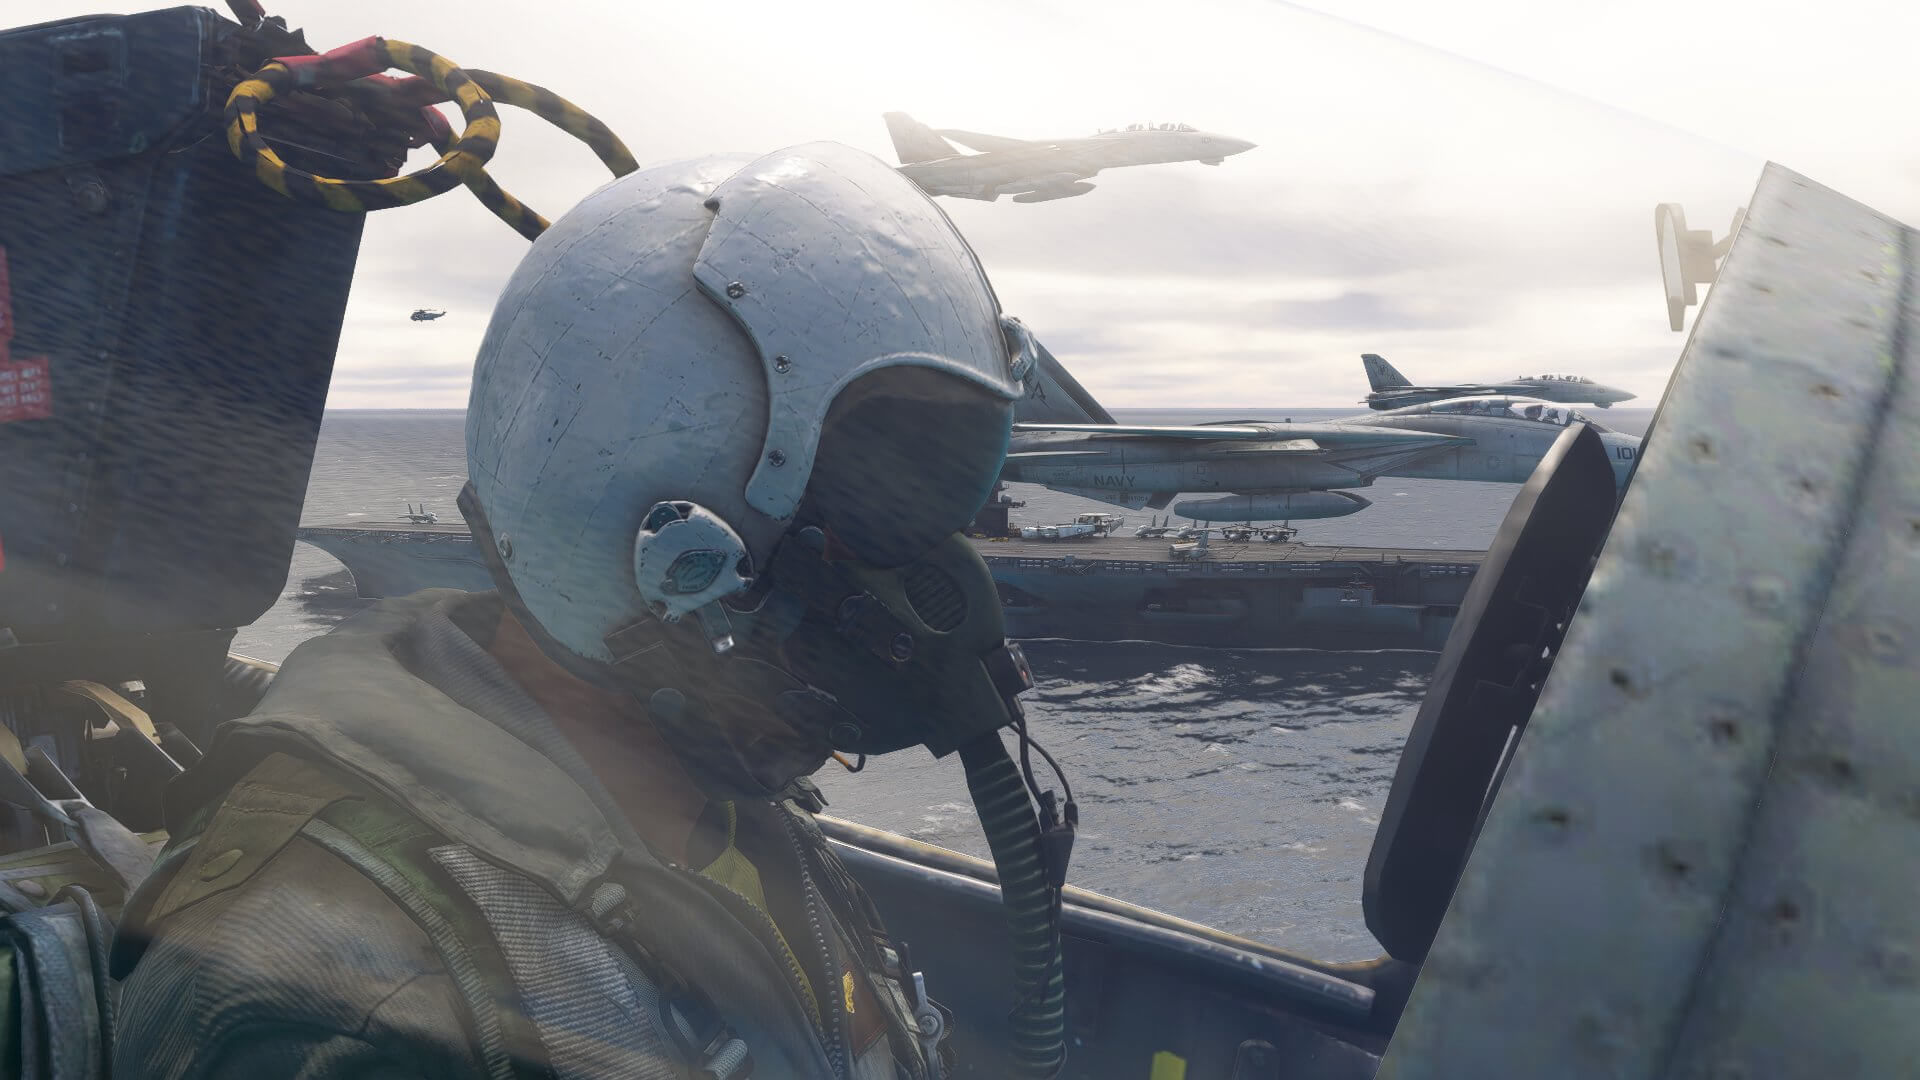 An F-14 pilot in helmet and breathing apparatus looks forward whilst in close formation with three other jets, passing low over an aircraft carrier